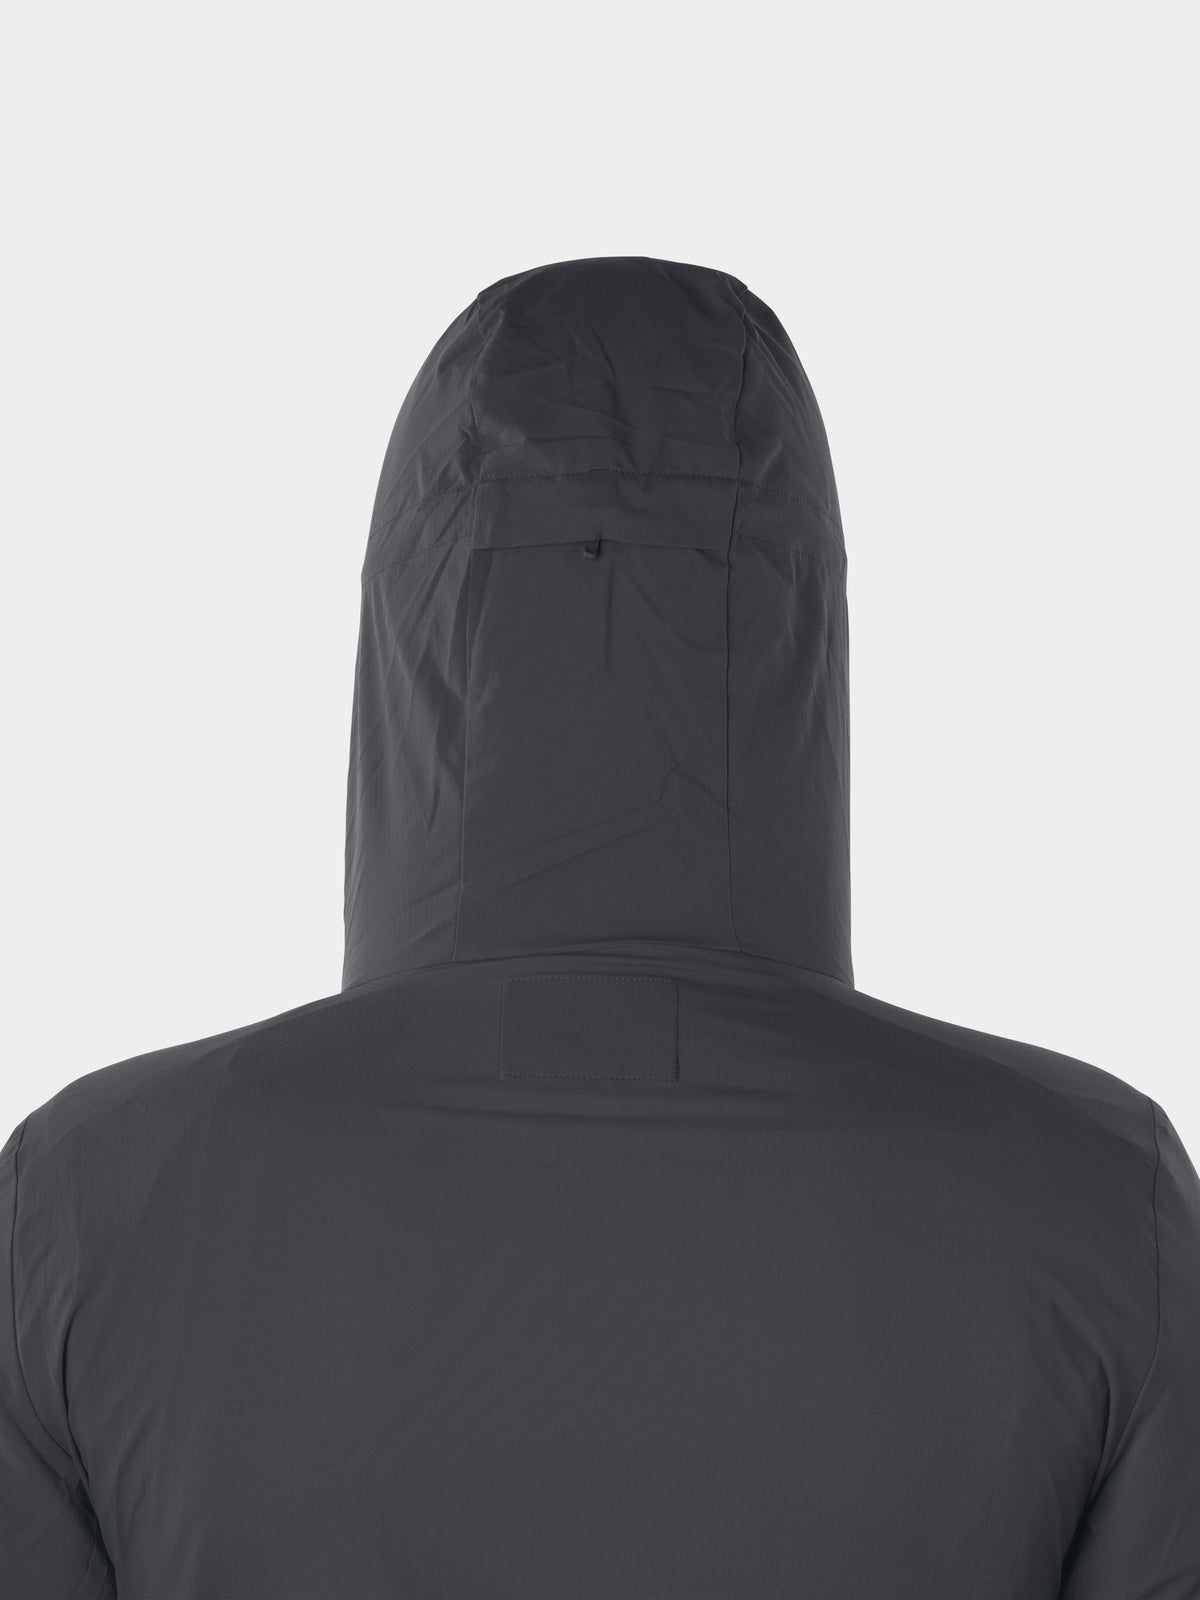 Airflow Windshell Jacket - Charcoal – Duck Camp